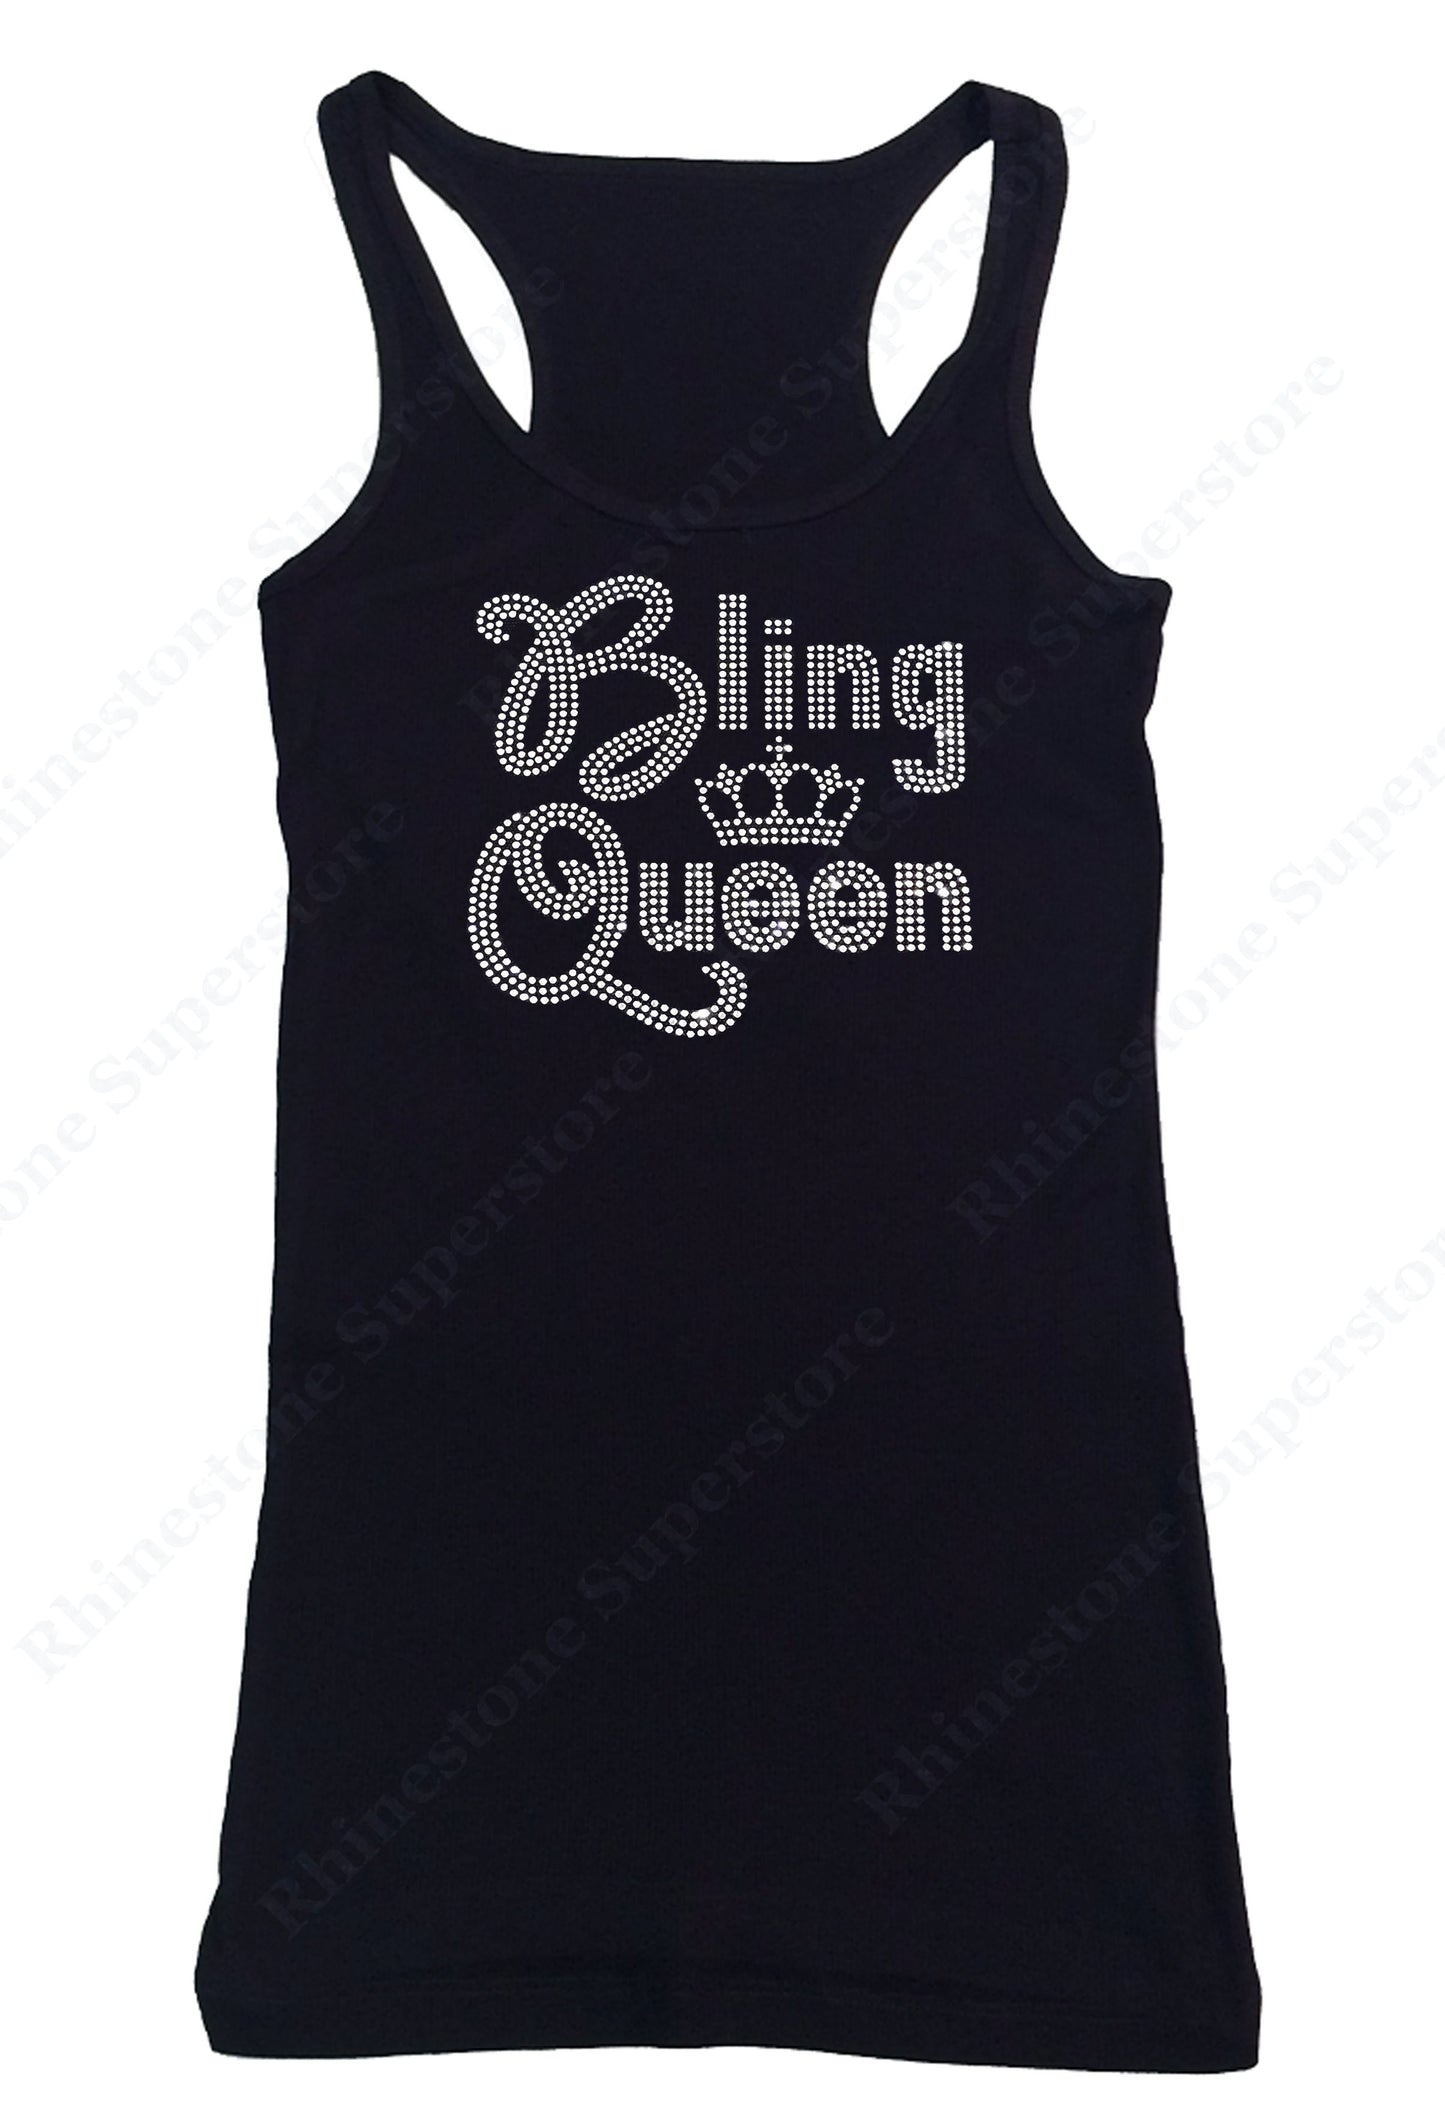 Womens T-shirt with Bling Queen in Rhinestones